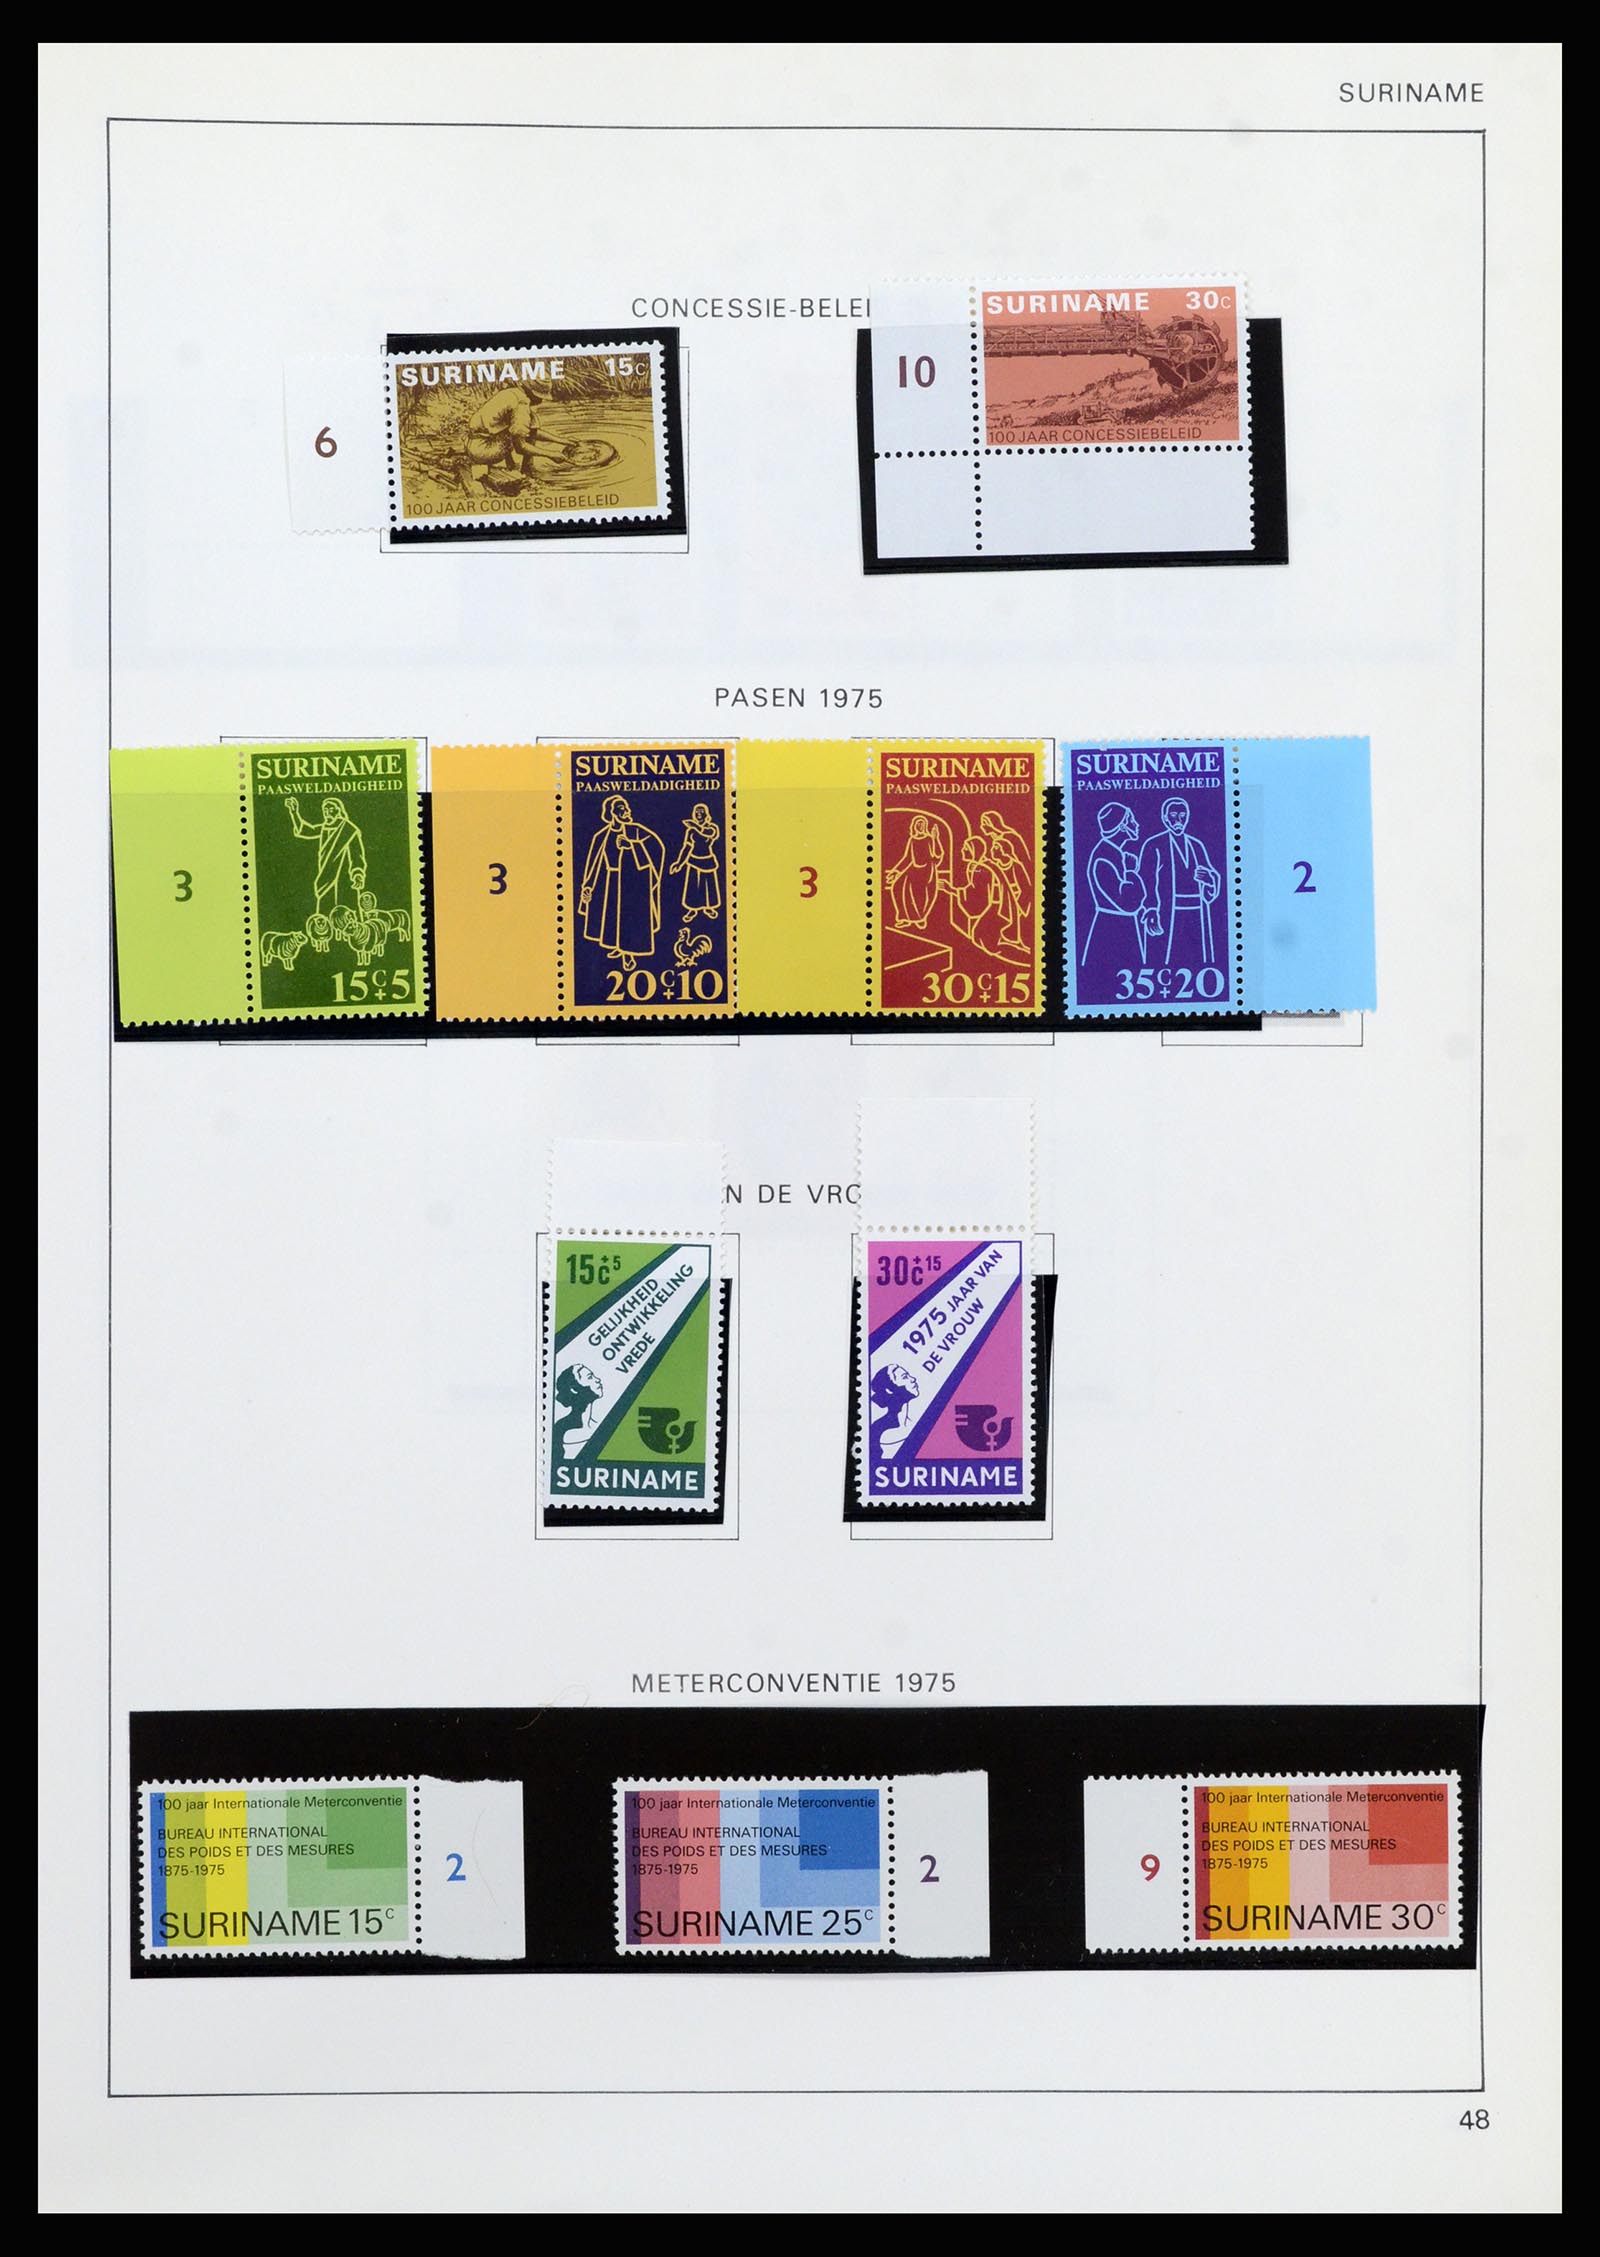 37217 130 - Stamp collection 37217 Dutch territories 1864-1975.